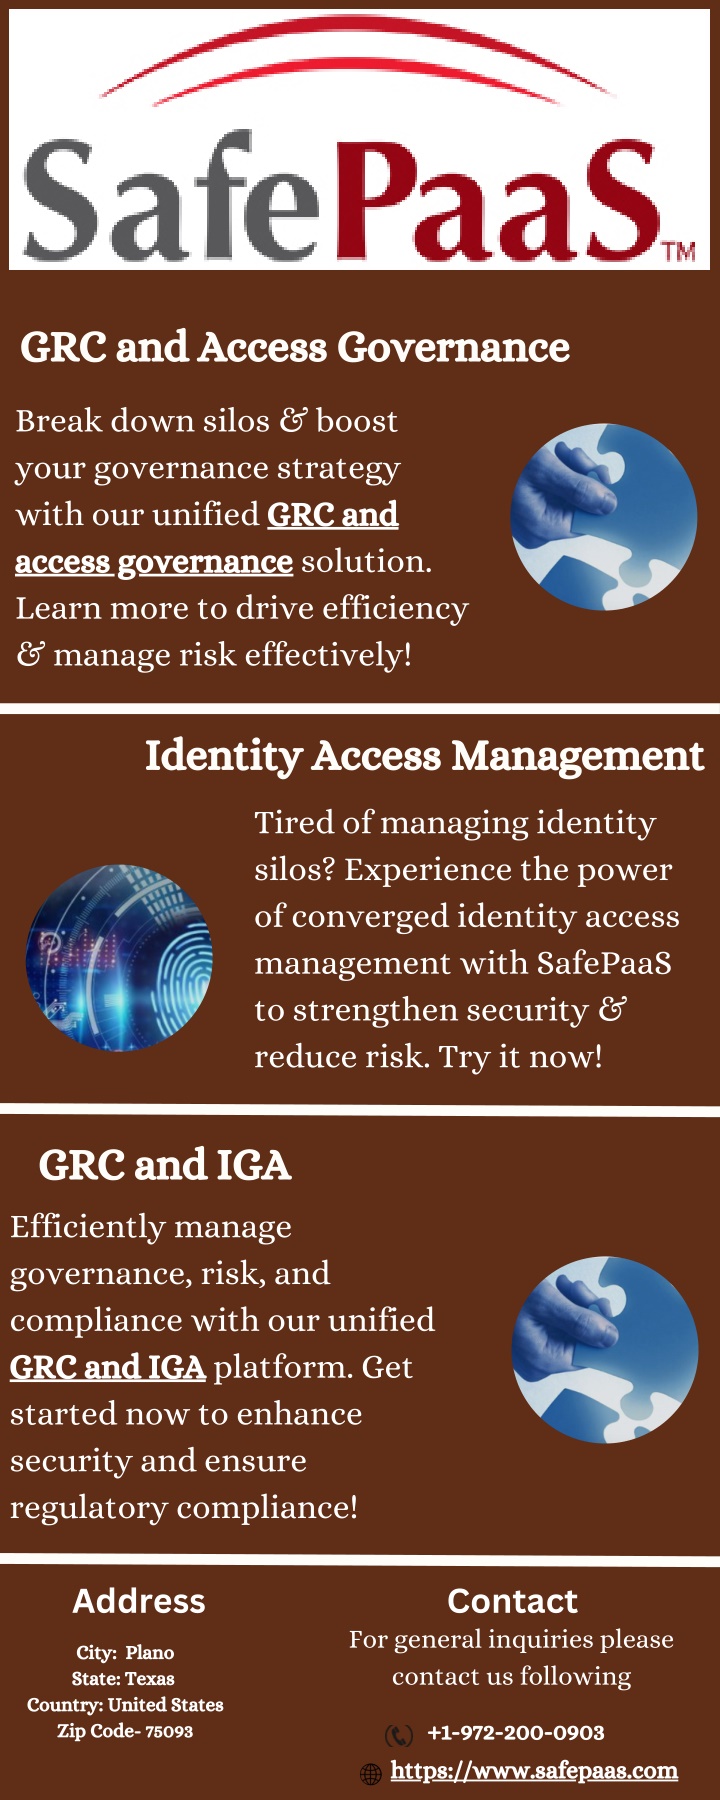 grc and access governance